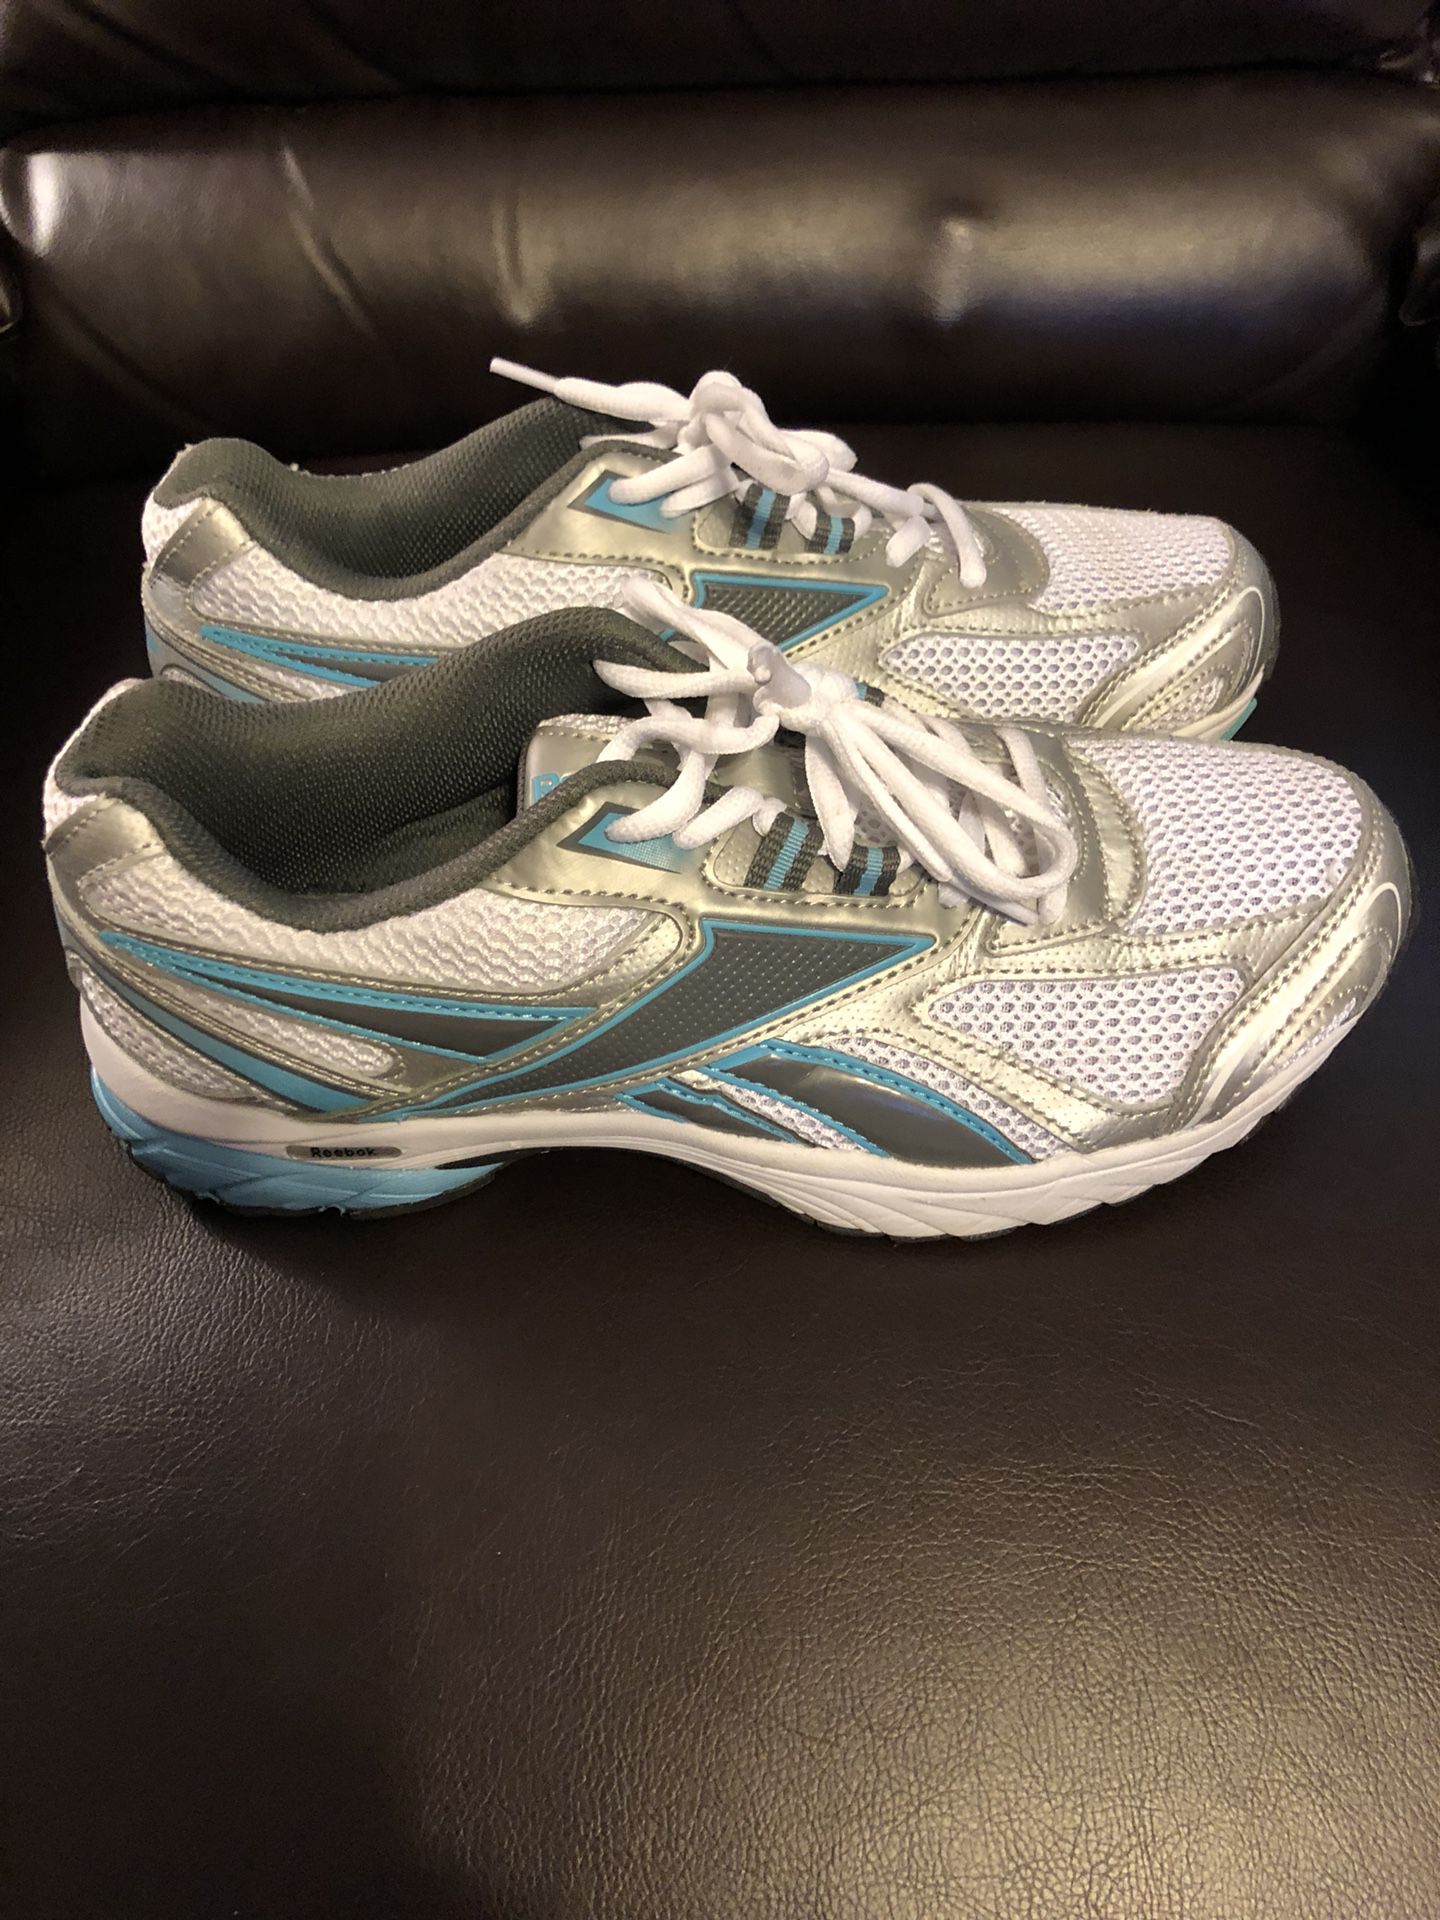 Woman’s Reebok Running Shoes Size 10